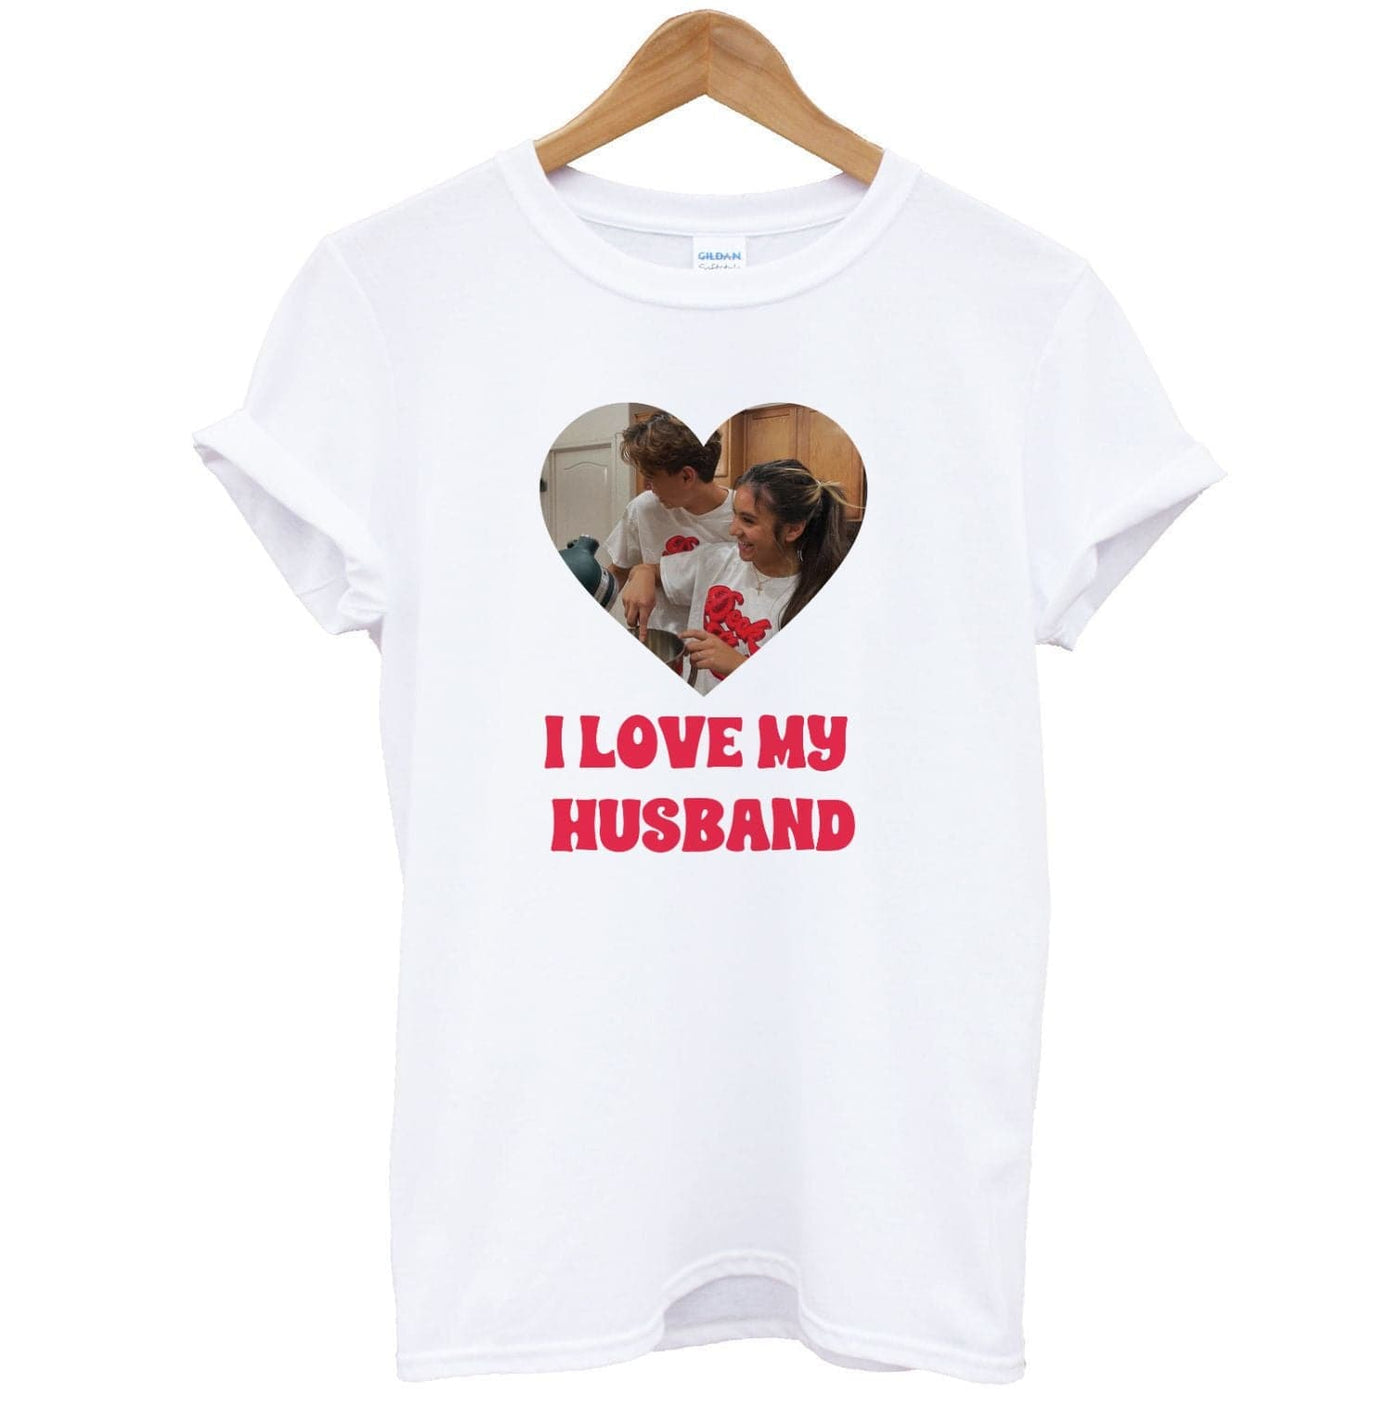 I Love My Husband - Personalised Couples T-Shirt